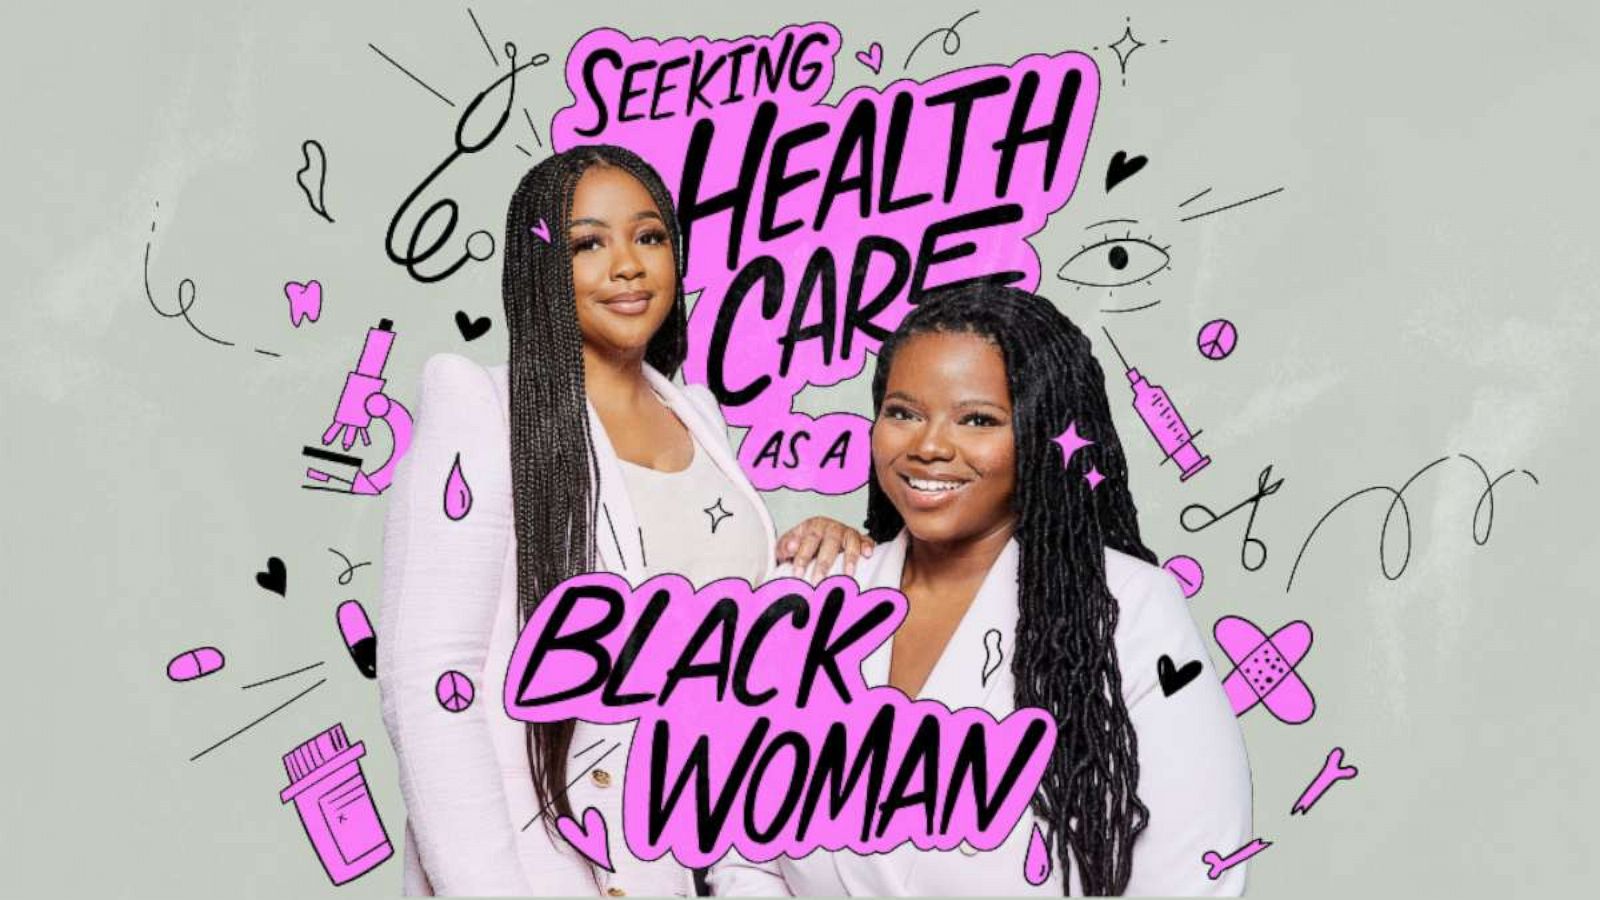 Black women offer a solution to curb racial health care disparity - Good  Morning America